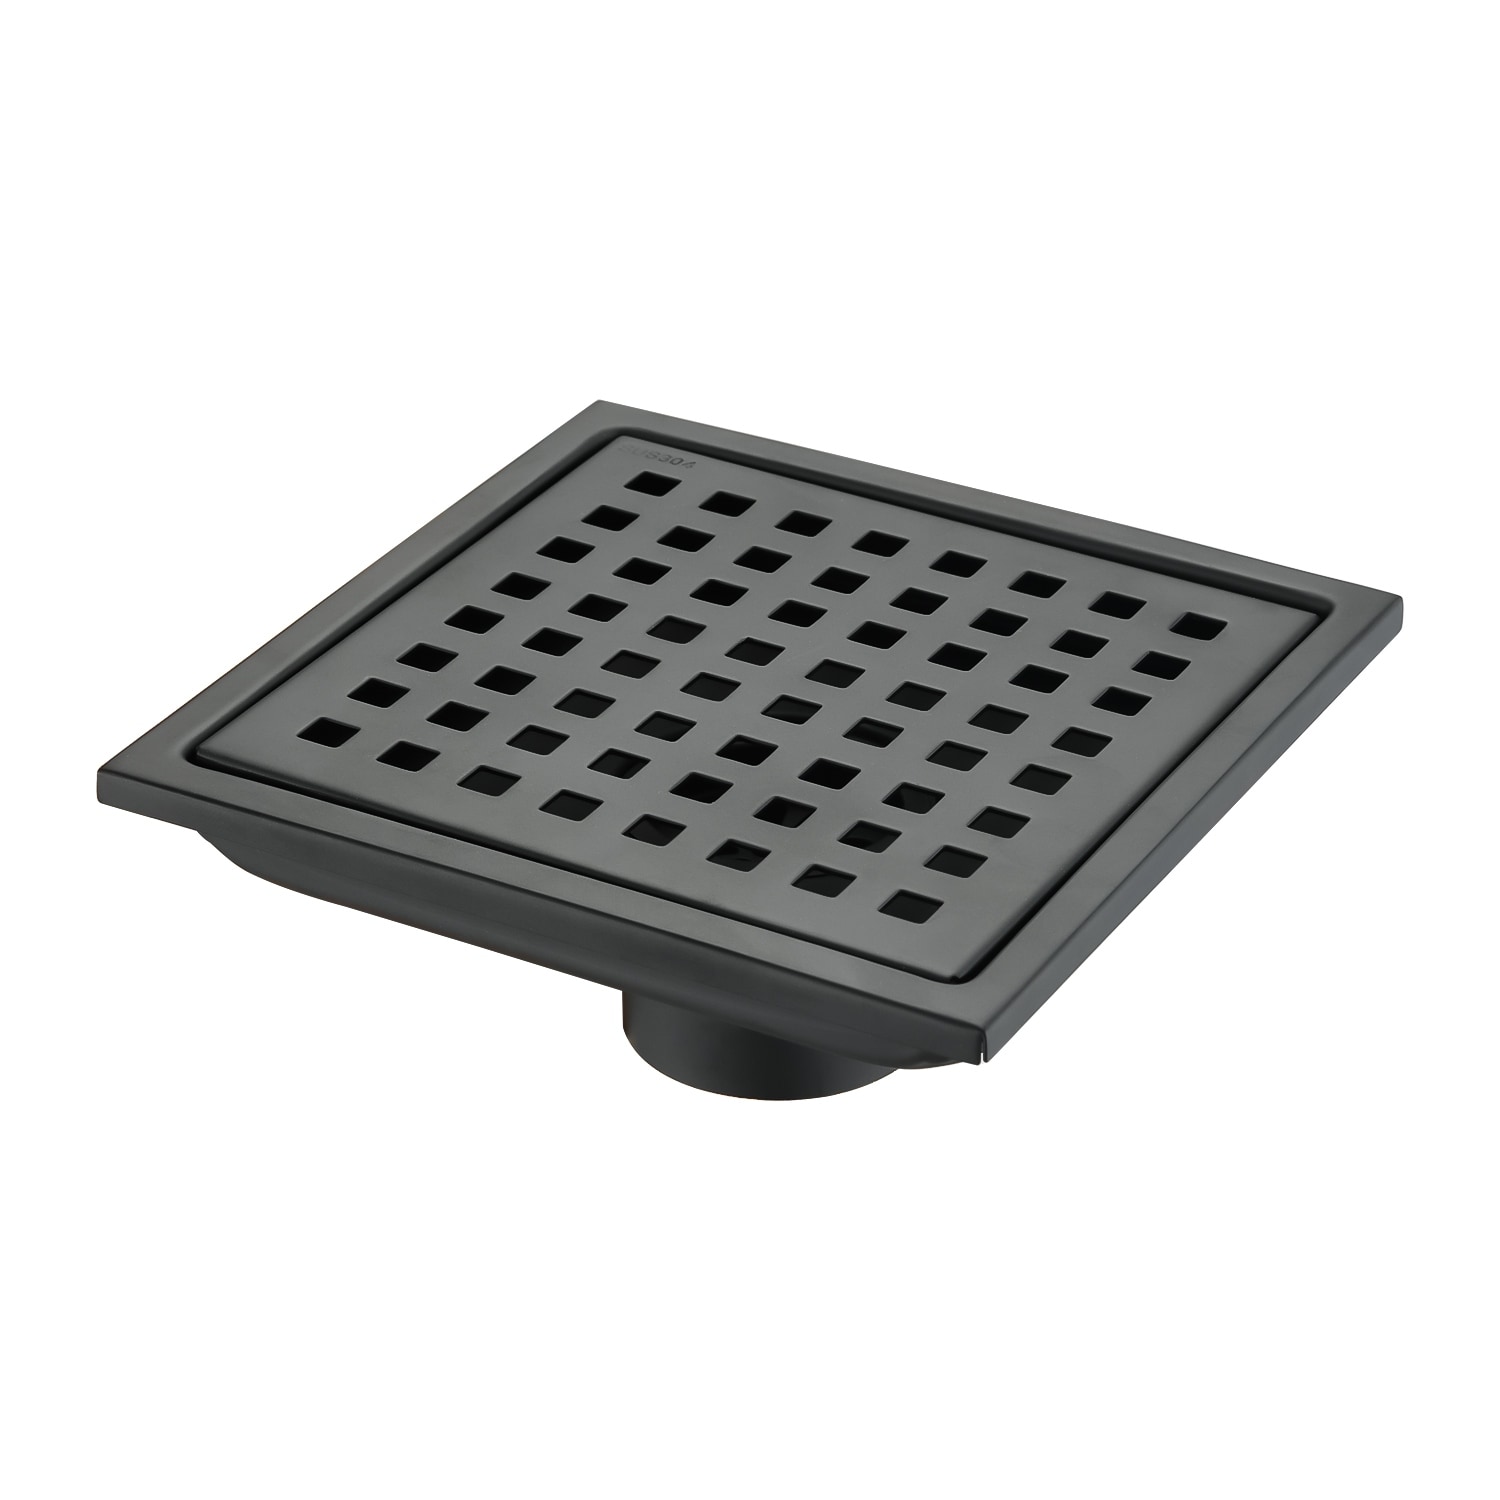 https://ak1.ostkcdn.com/images/products/is/images/direct/34188e47d77605309521199475dfd9ab1dc1aa3f/Matte-Black-Stainless-Steel-Square-Shower-Floor-Drain.jpg